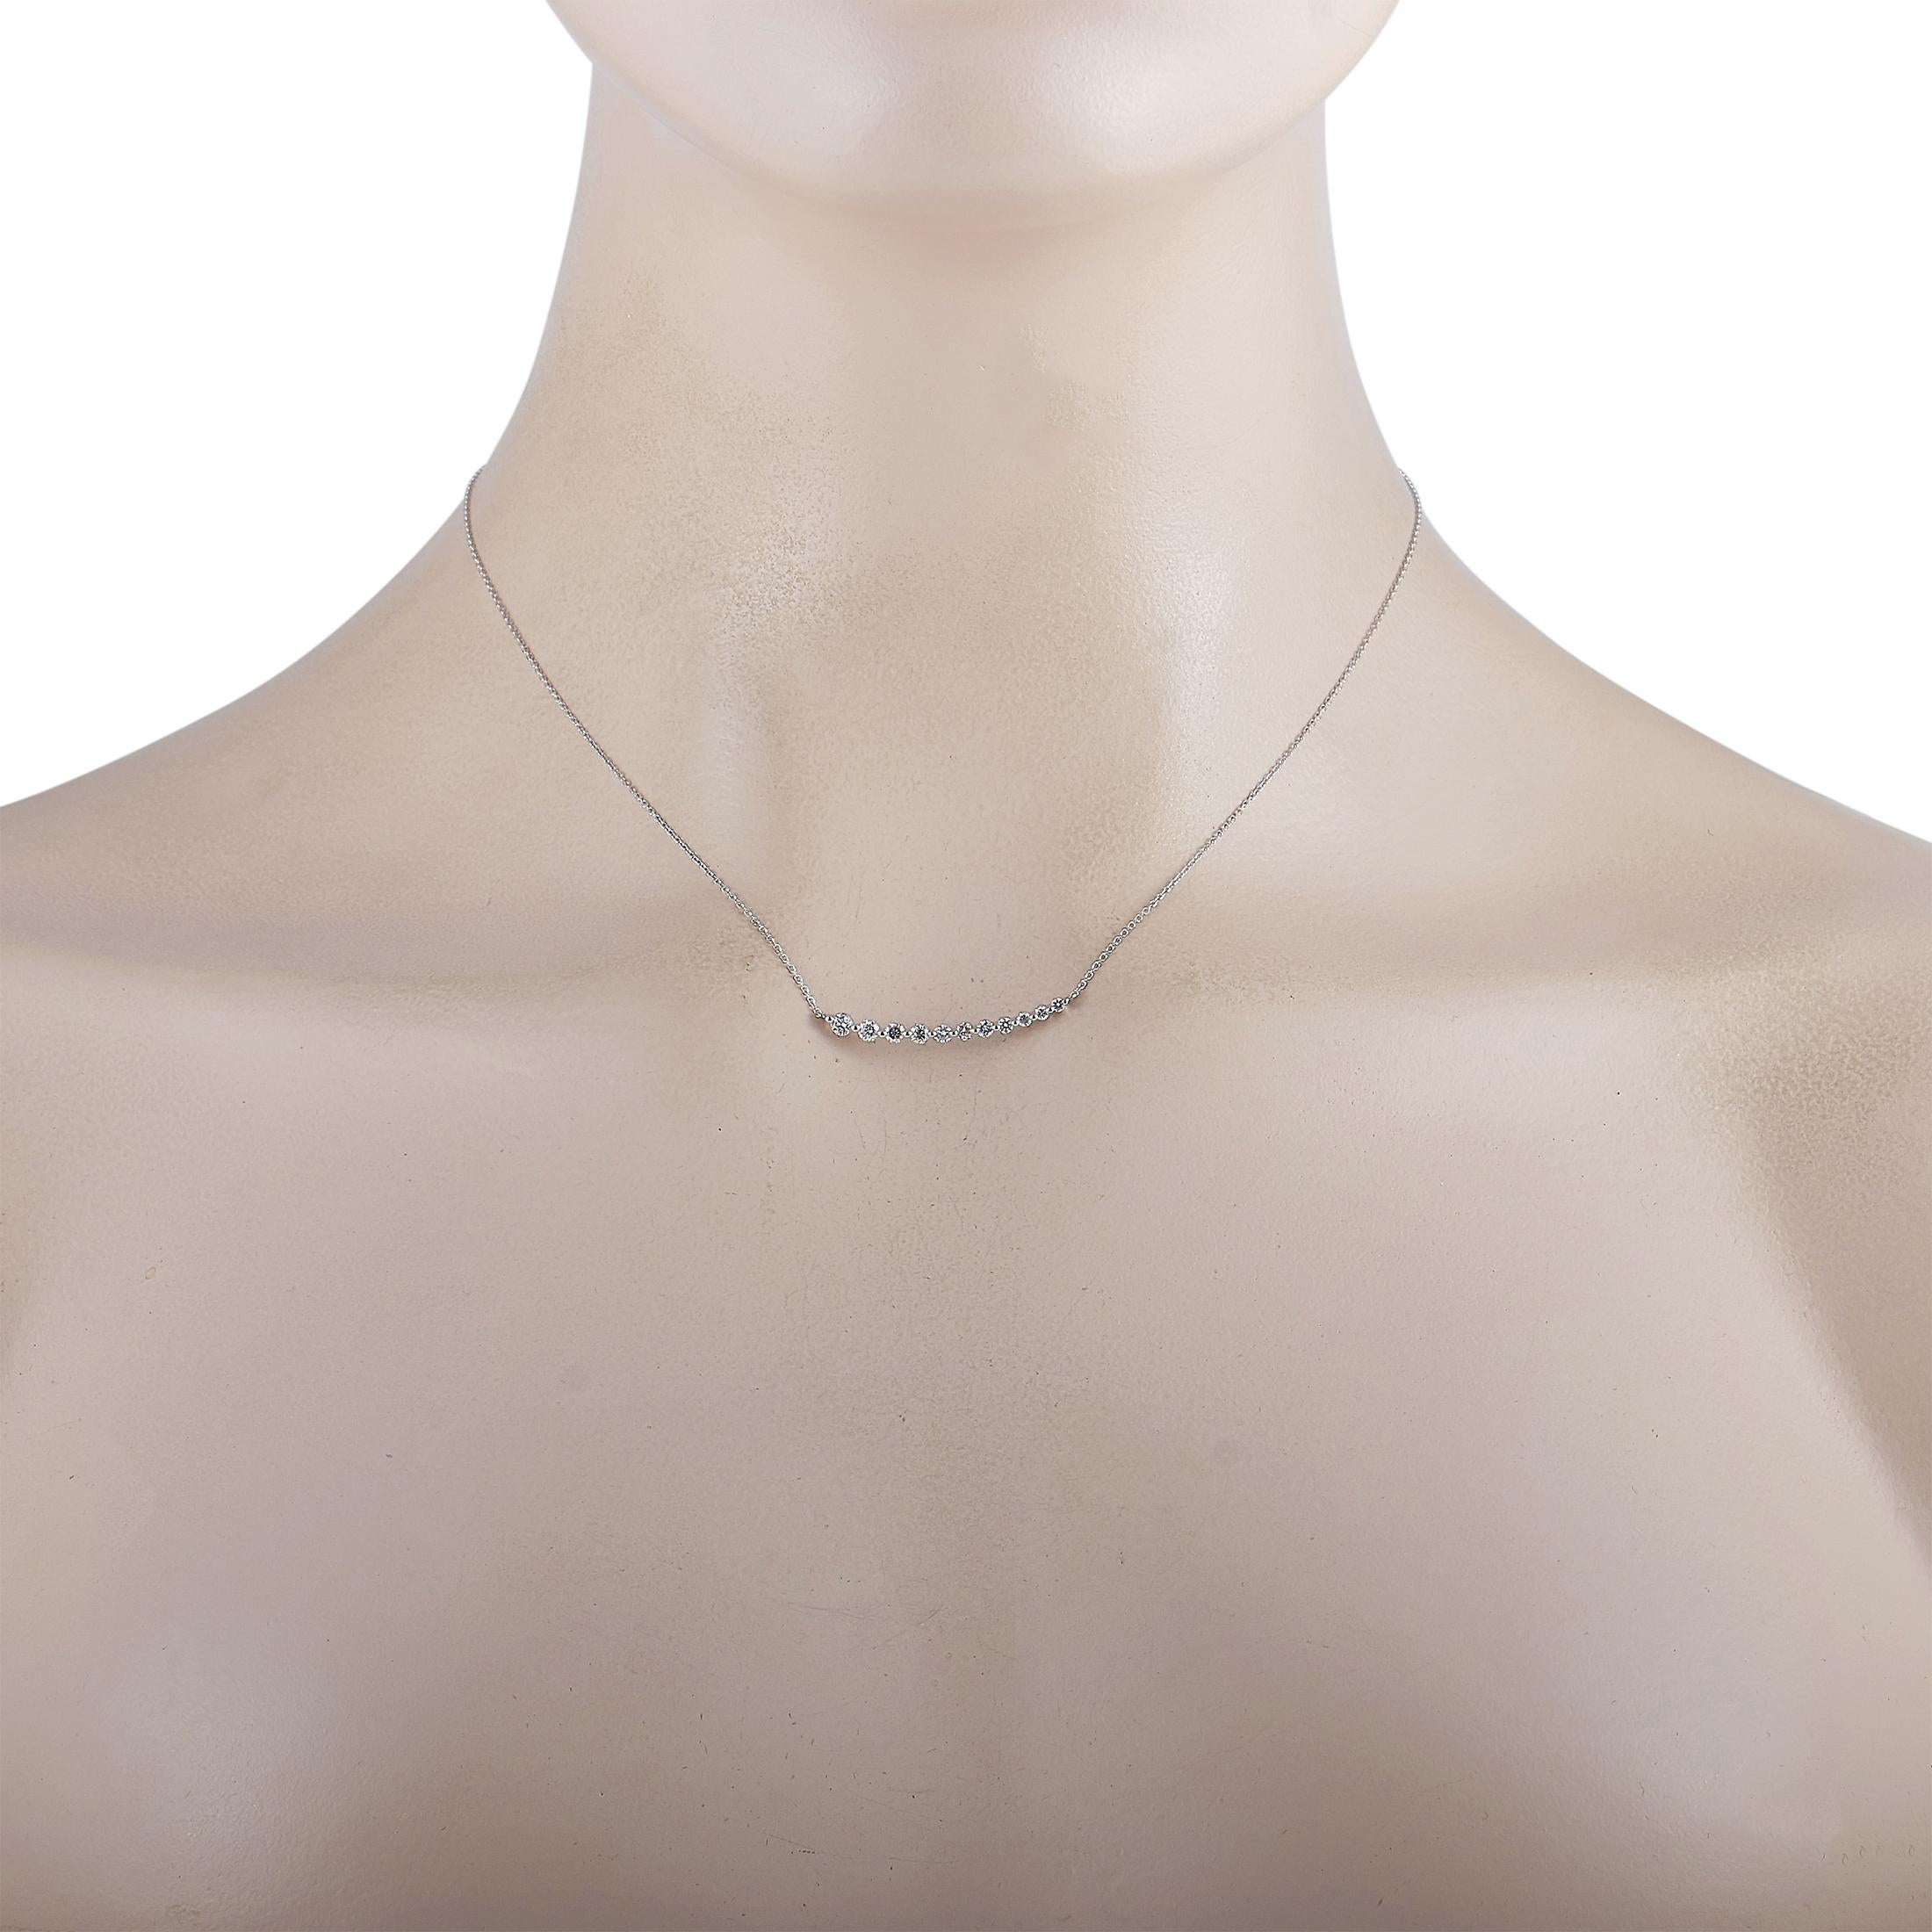 This LB Exclusive necklace is crafted from 18K white gold and weighs 2.2 grams. It is presented with a 16” chain and a pendant that measures 0.12” in length and 1.25” in width. The necklace is embellished with diamonds that total 0.50 carats.
 
